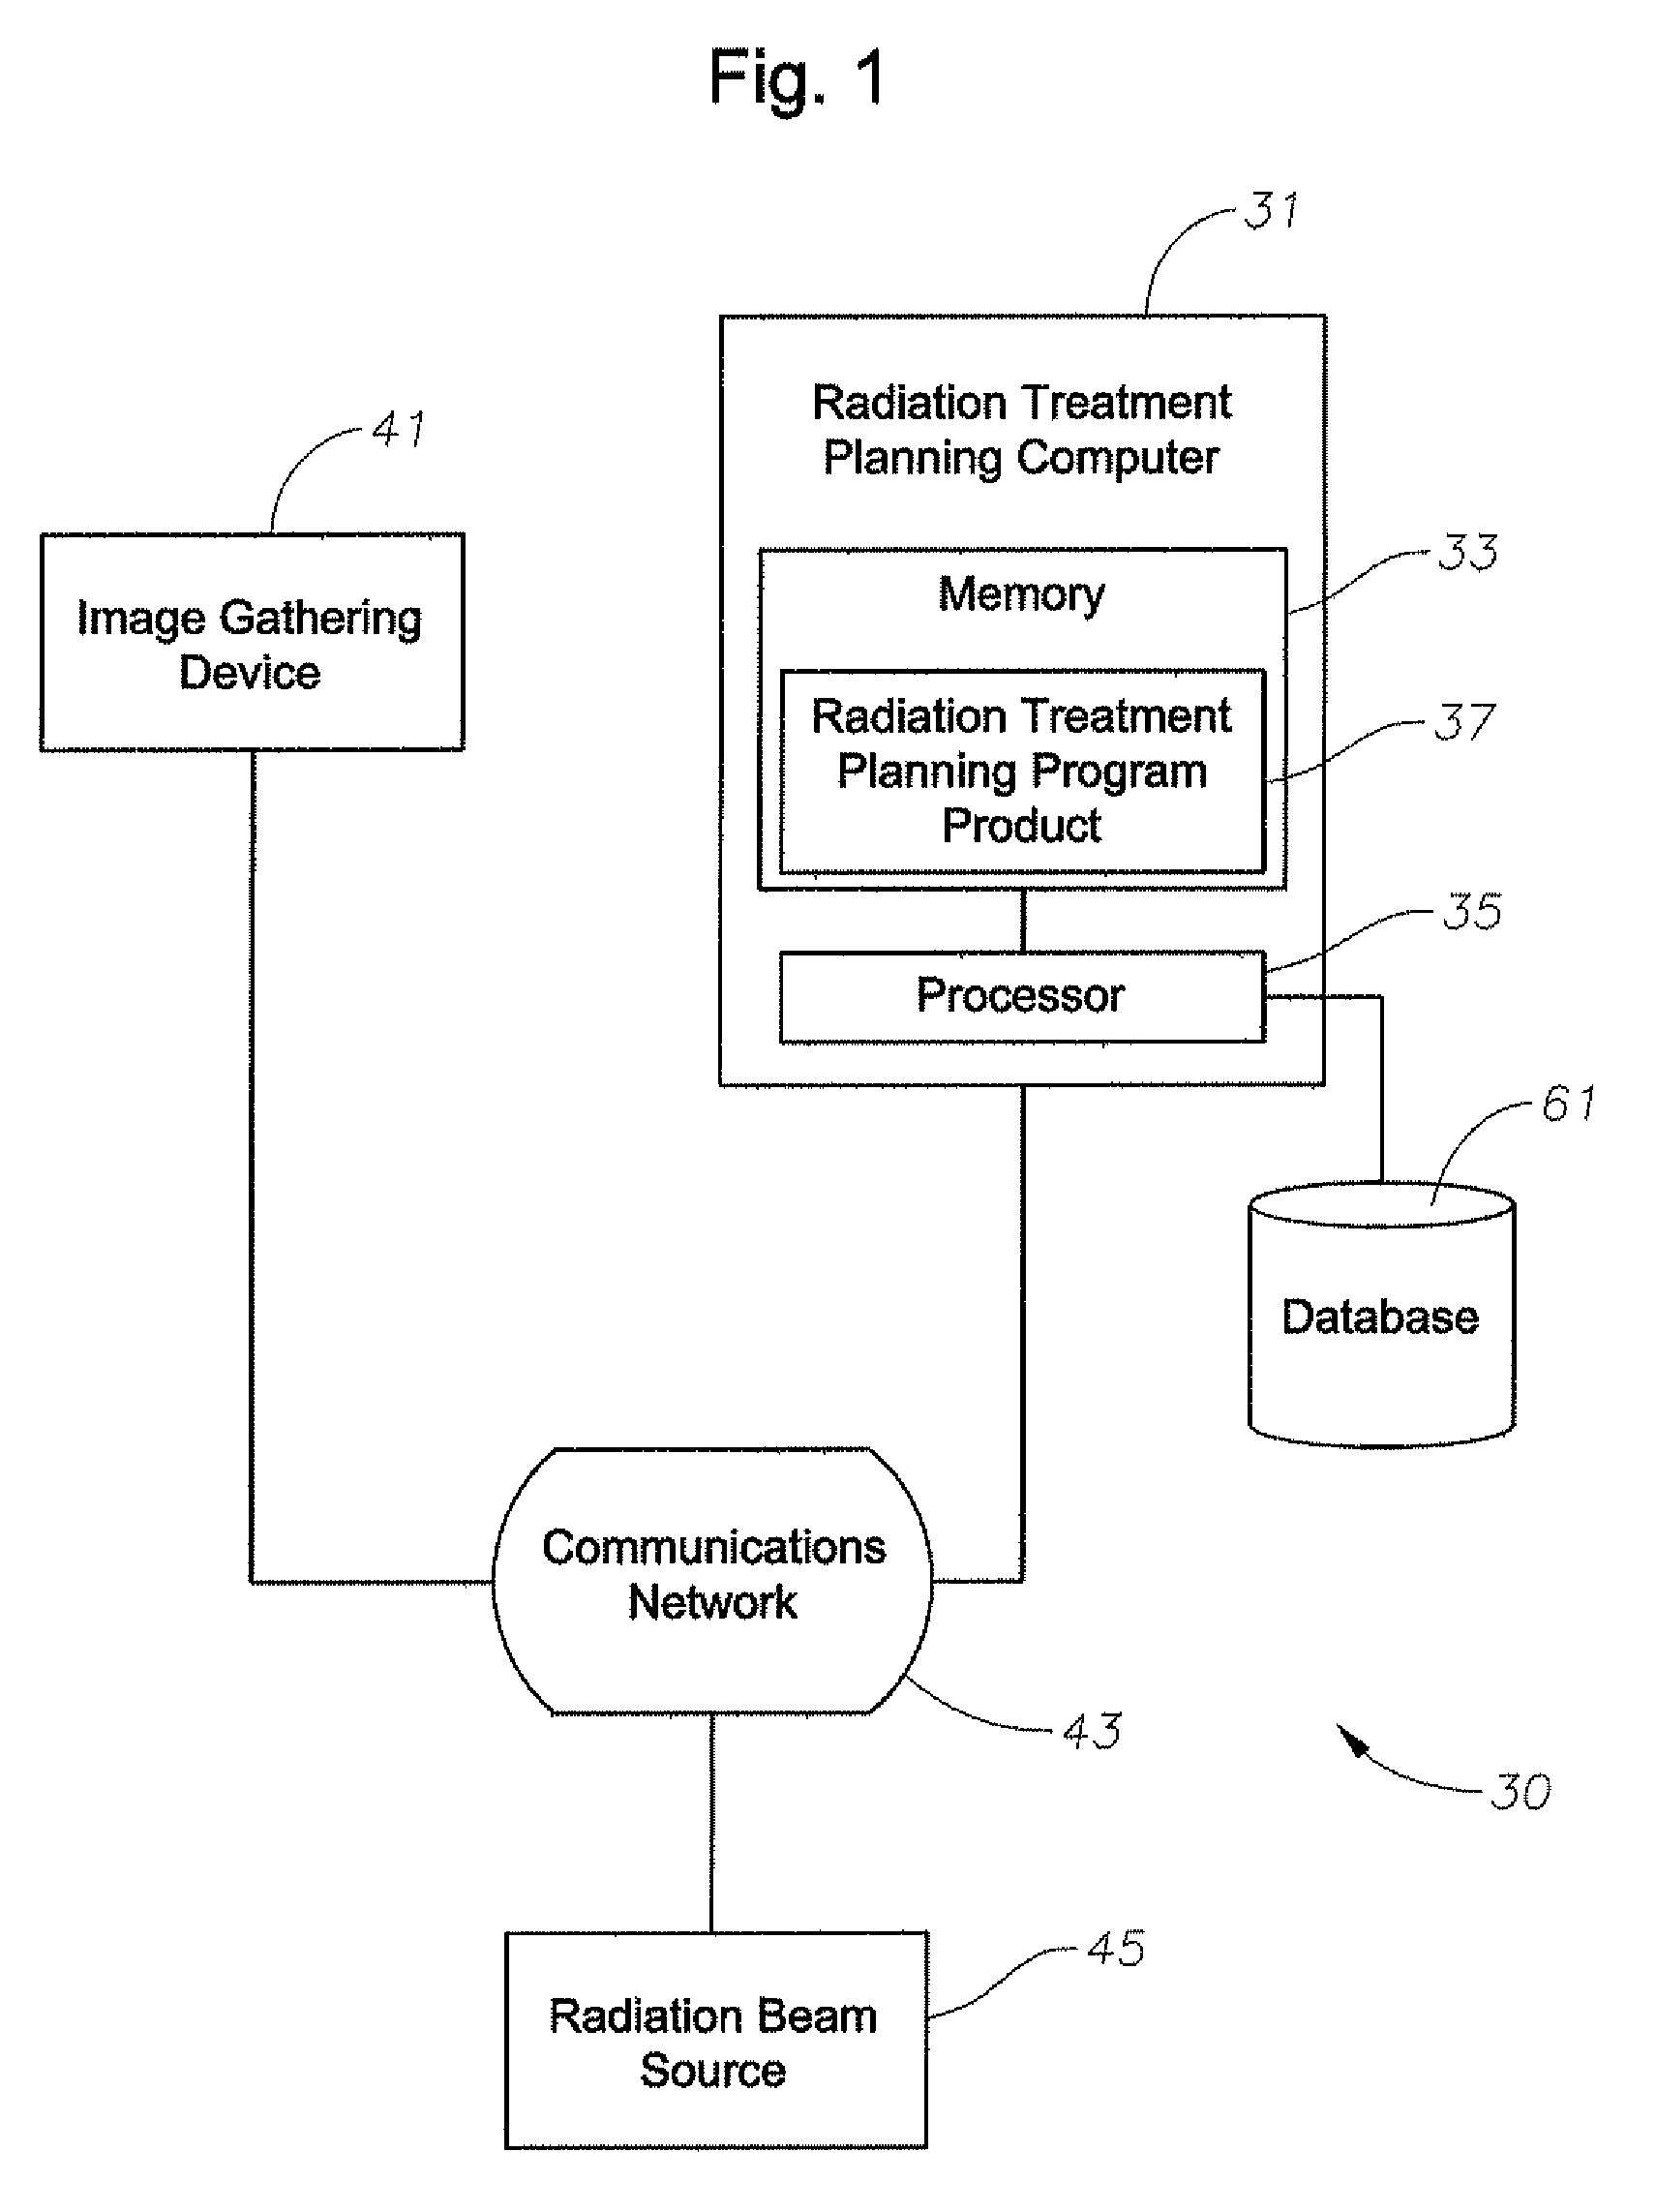 System for enhancing intensity modulated radiation therapy, program product, and related methods